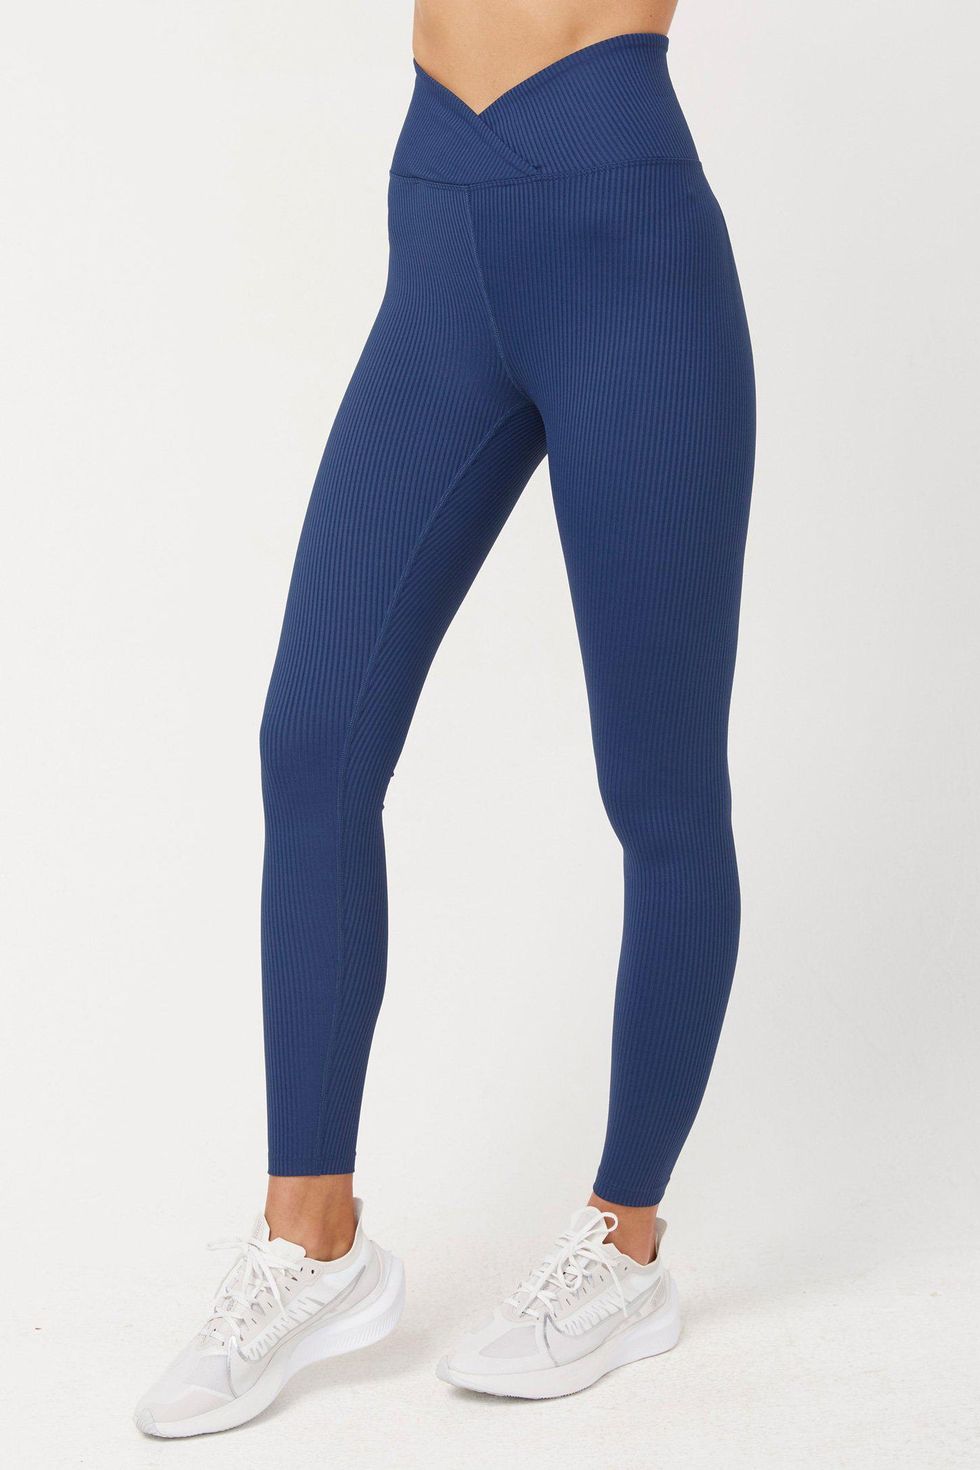 10 Crossover Leggings That'll Make You Look Stunning – Zioccie